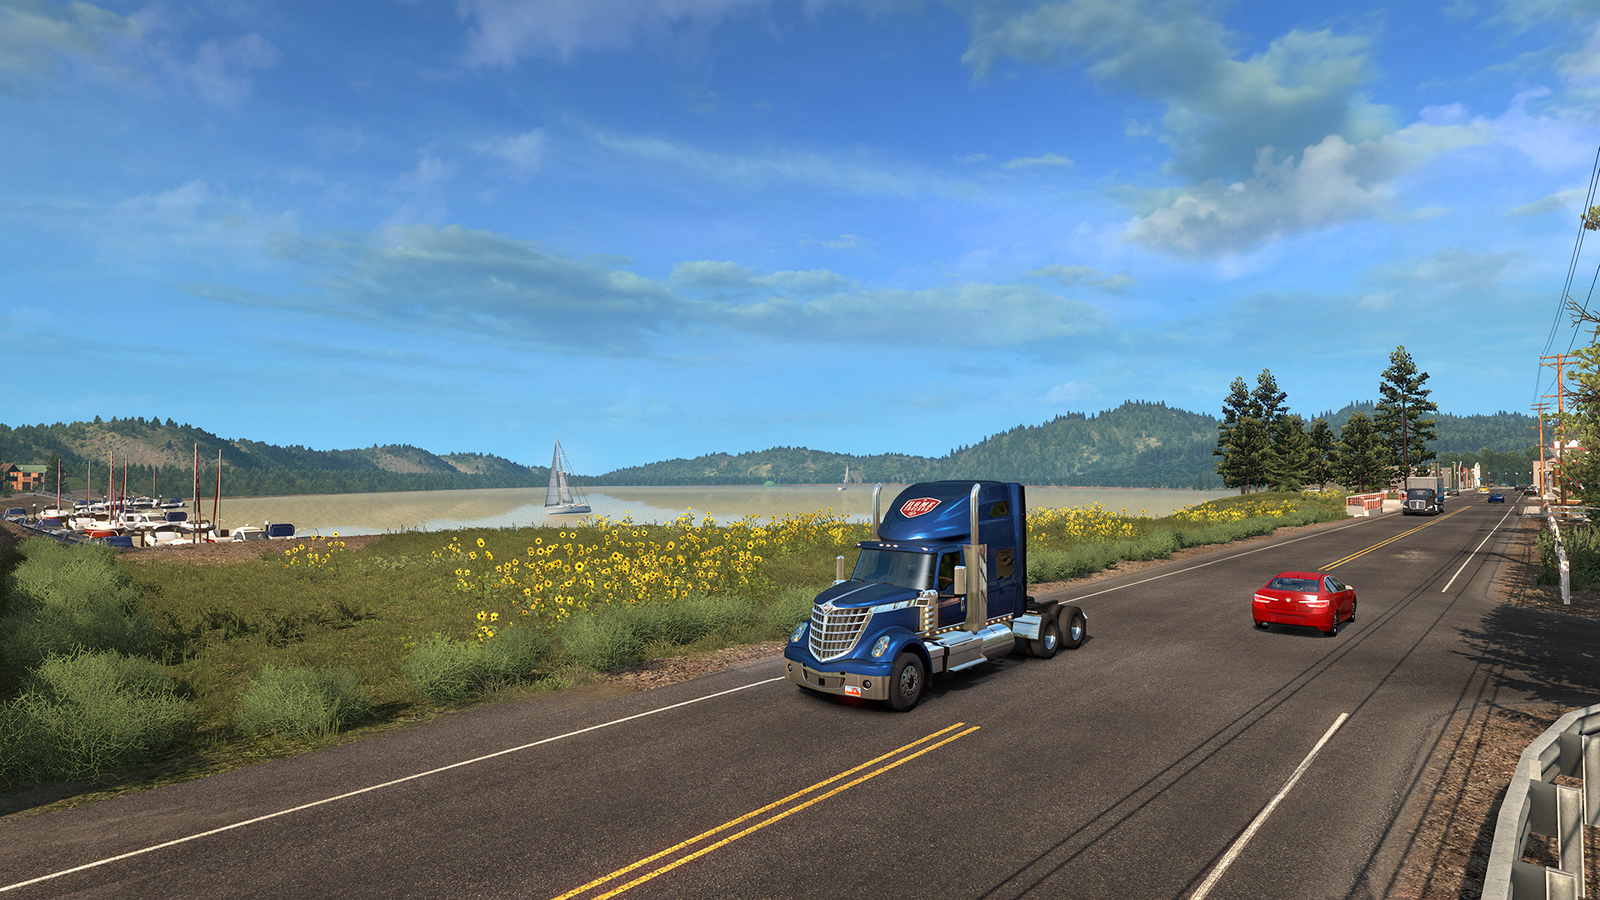 American Truck Simulator going sightseeing with Viewpoints